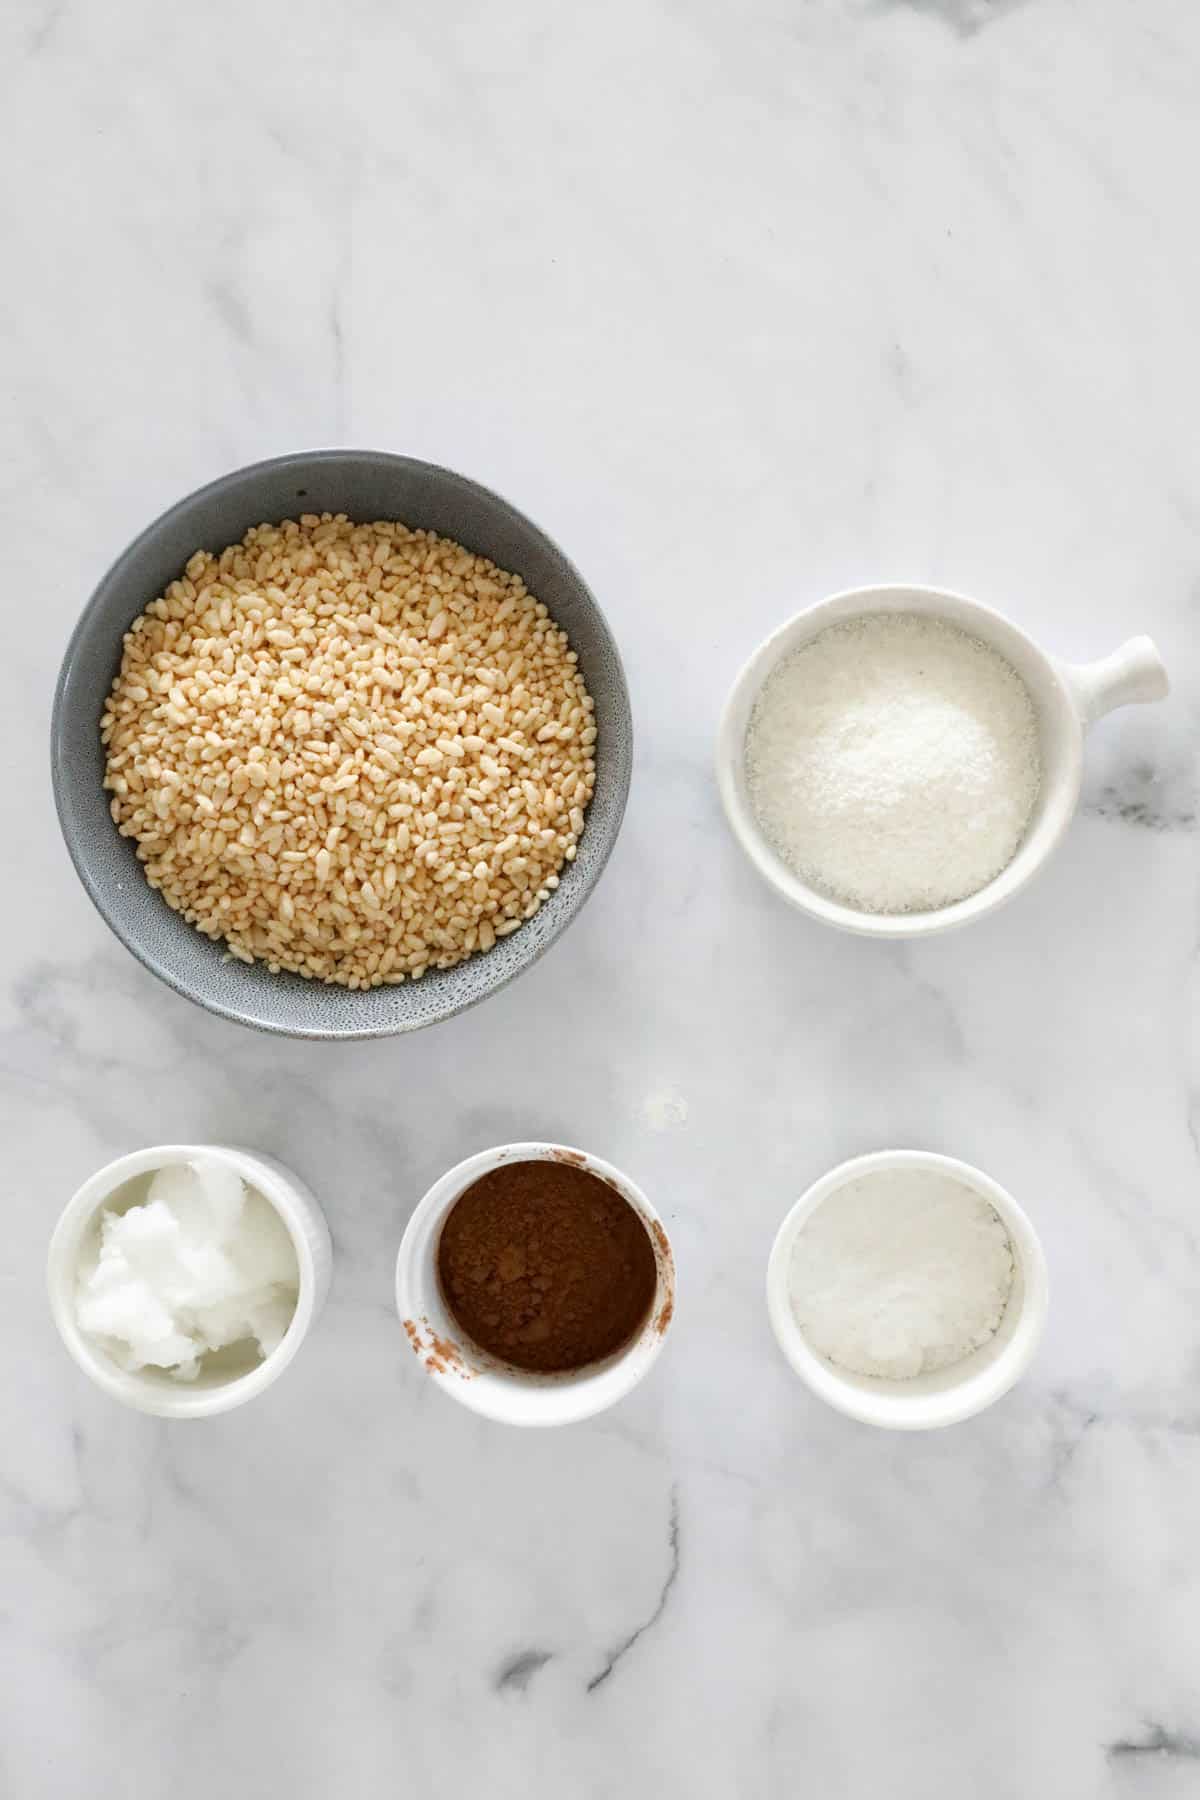 The ingredients for chocolate crackles.